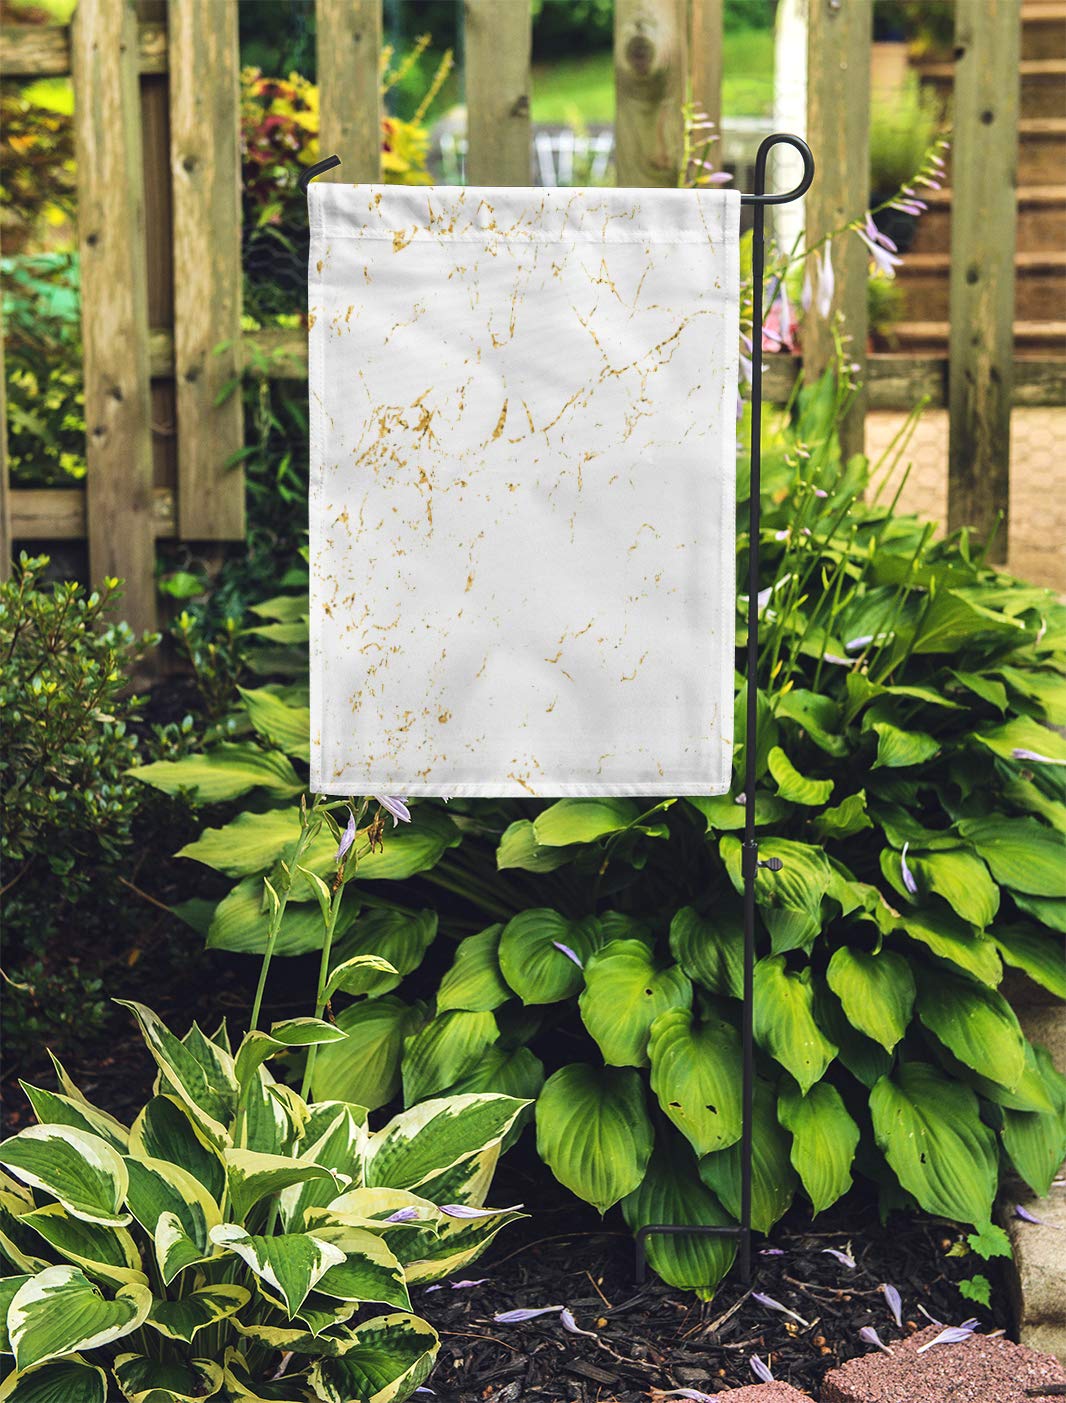 KDAGR Marble Gold Patina Scratch Golden Sketch to Create Distressed Effect Garden Flag Decorative Flag House Banner 28x40 inch - image 2 of 2